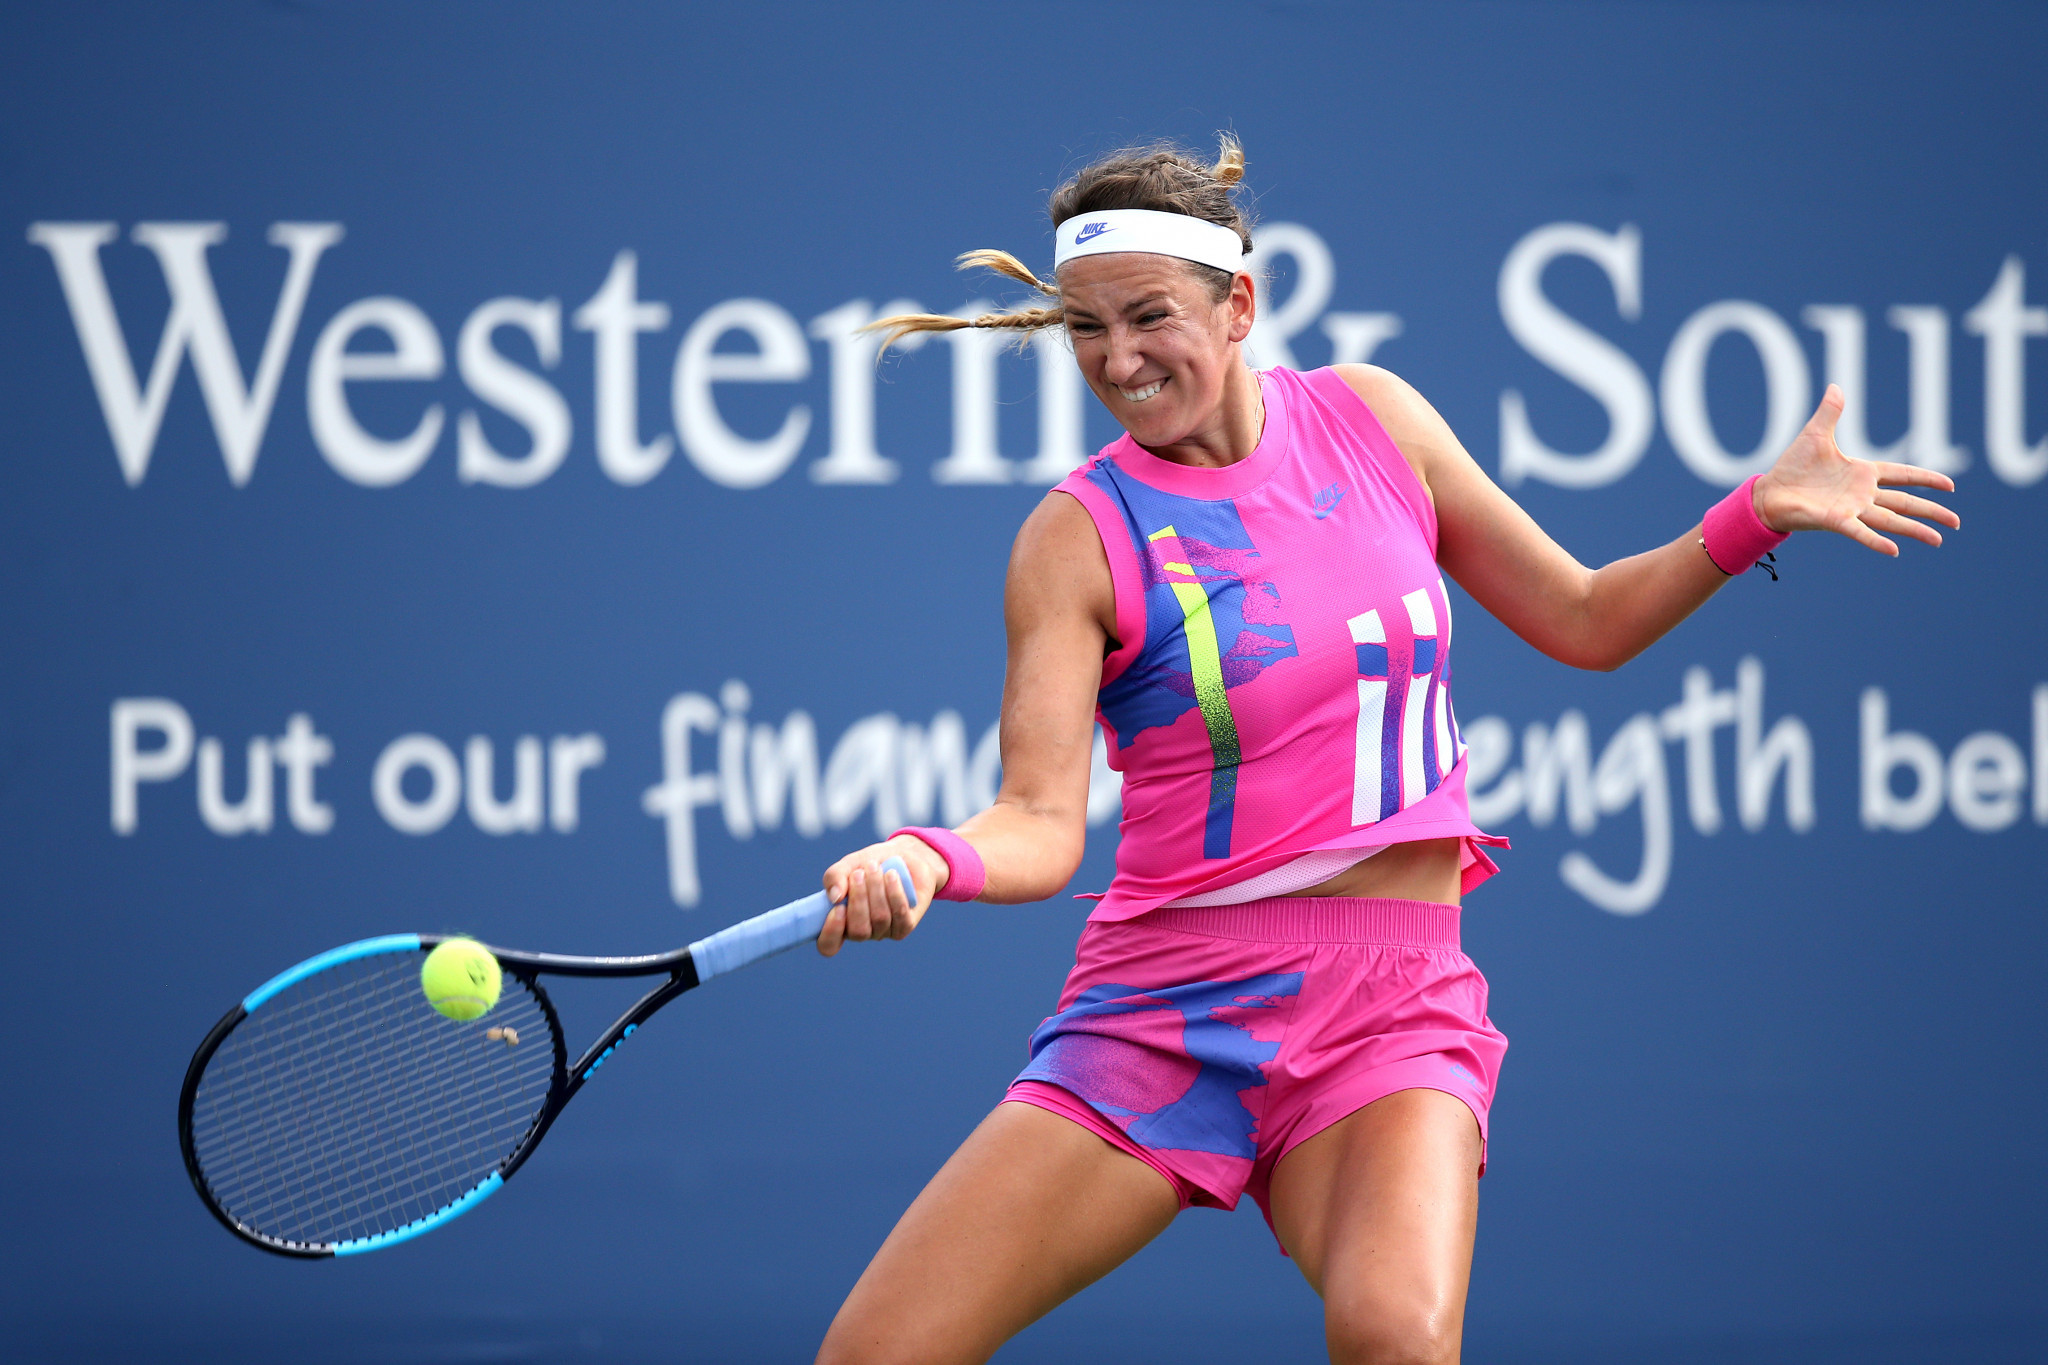 Victoria Azarenka won the women's Cincinnati Masters by walkover after her scheduled opponent Naomi Osaka withdrew ©Getty Images